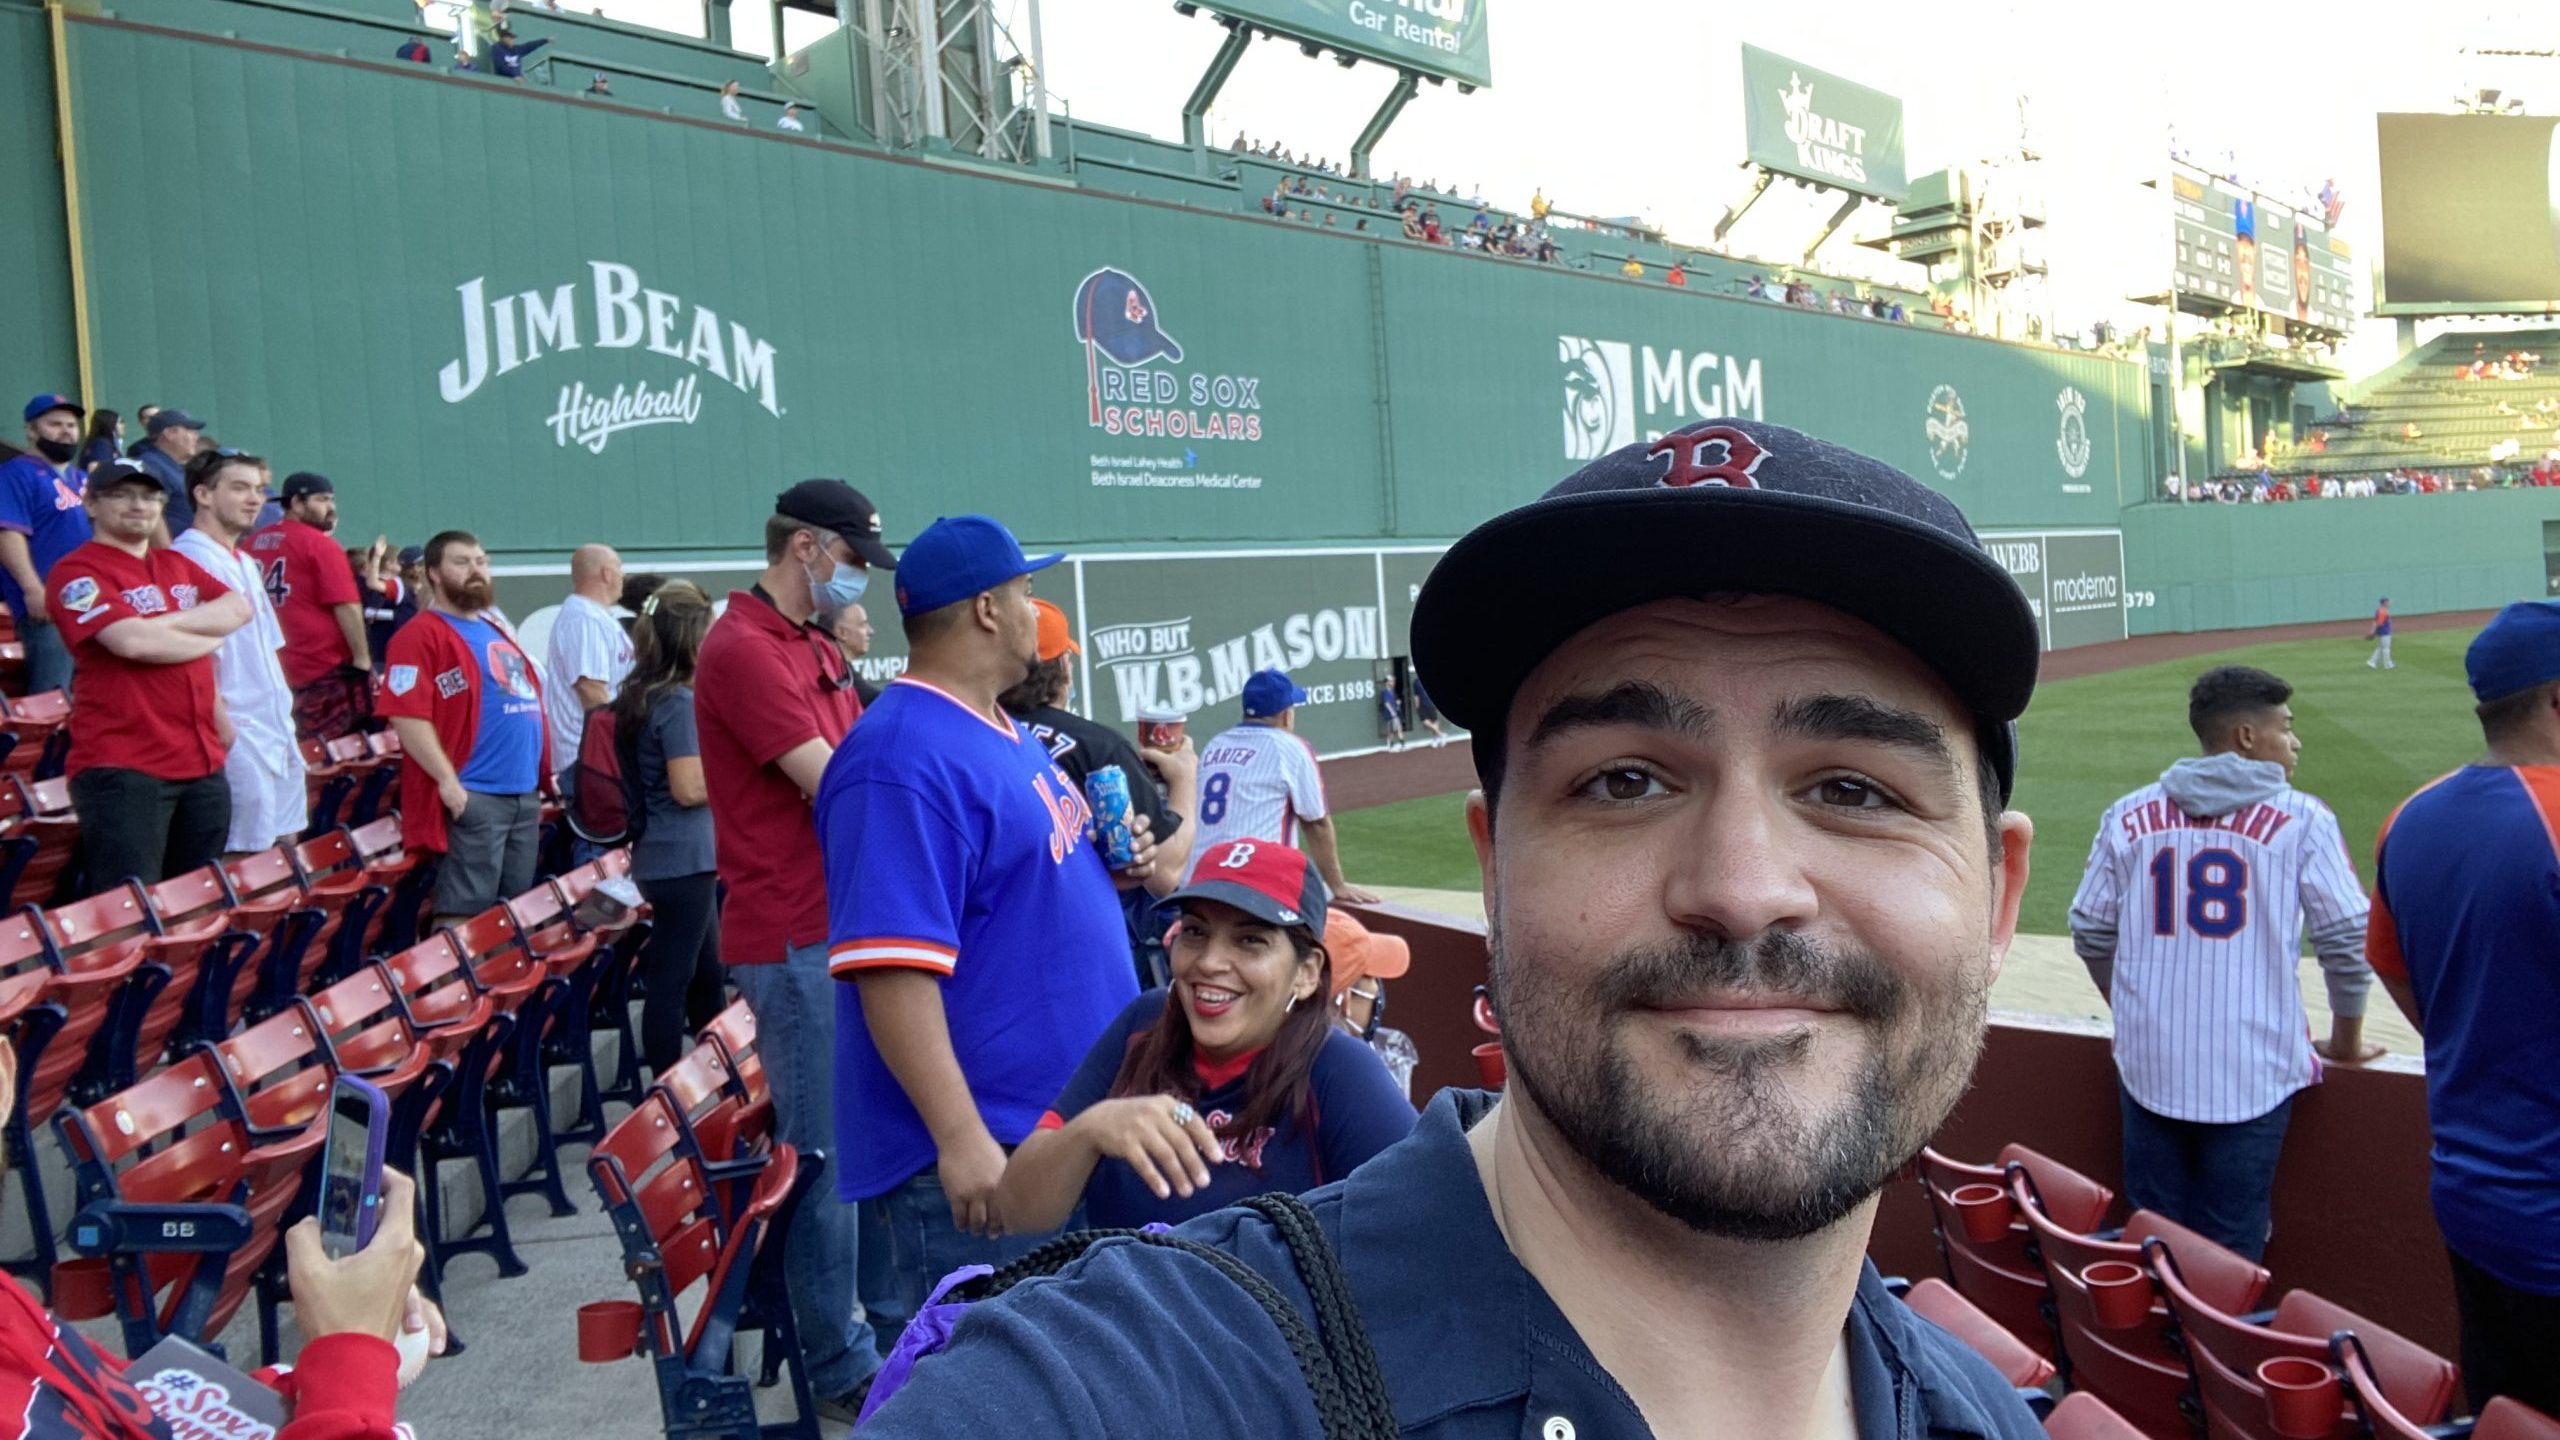 Gregory Crafts, playwright behind Pink Hat Blues and The Boys of Spring and Fall in the stands in front of the Legendary Green Monster at Fenway Park in Boston, MA on September 22nd, 2021